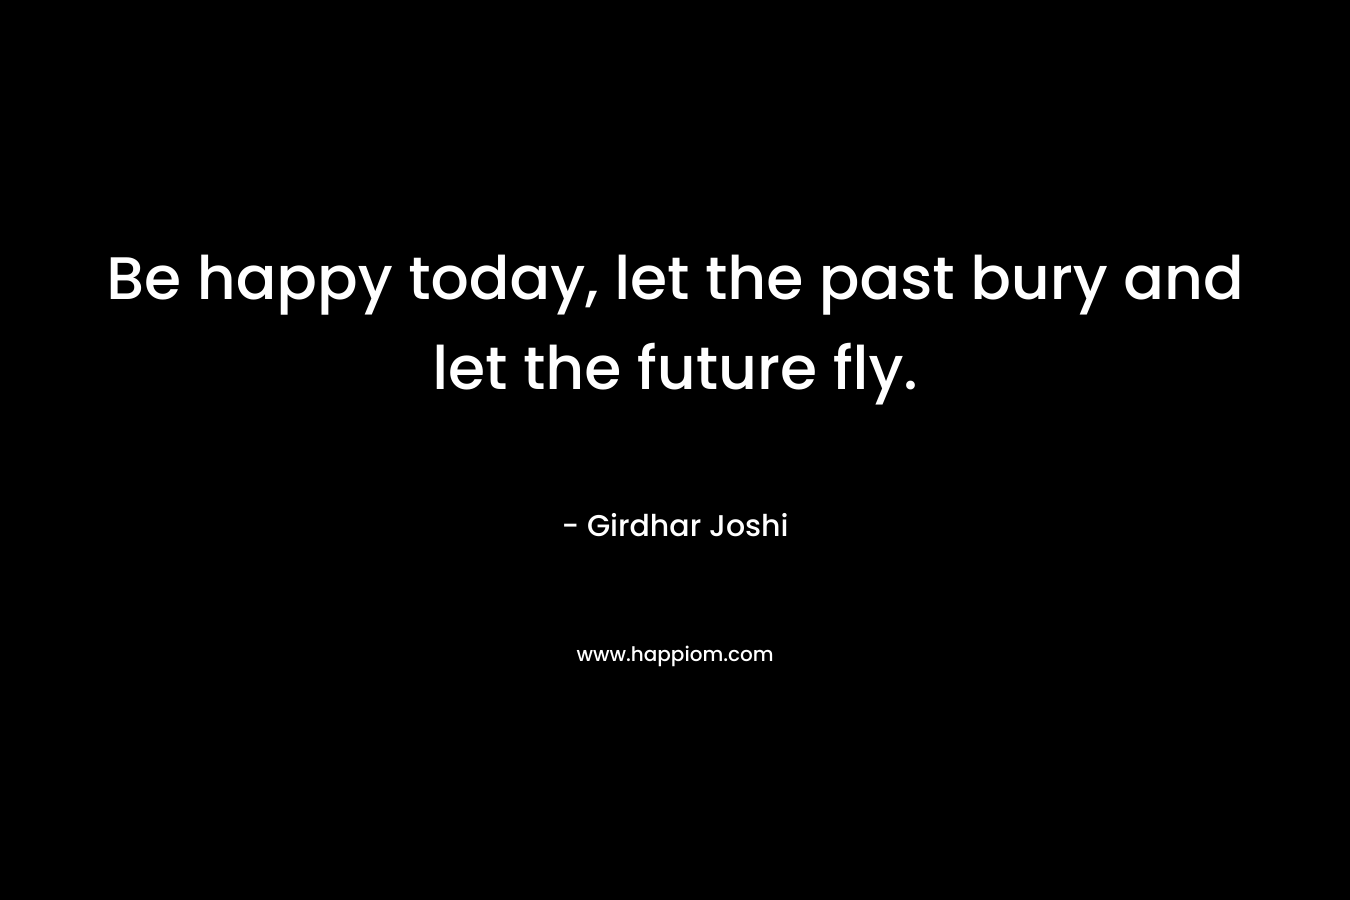 Be happy today, let the past bury and let the future fly.